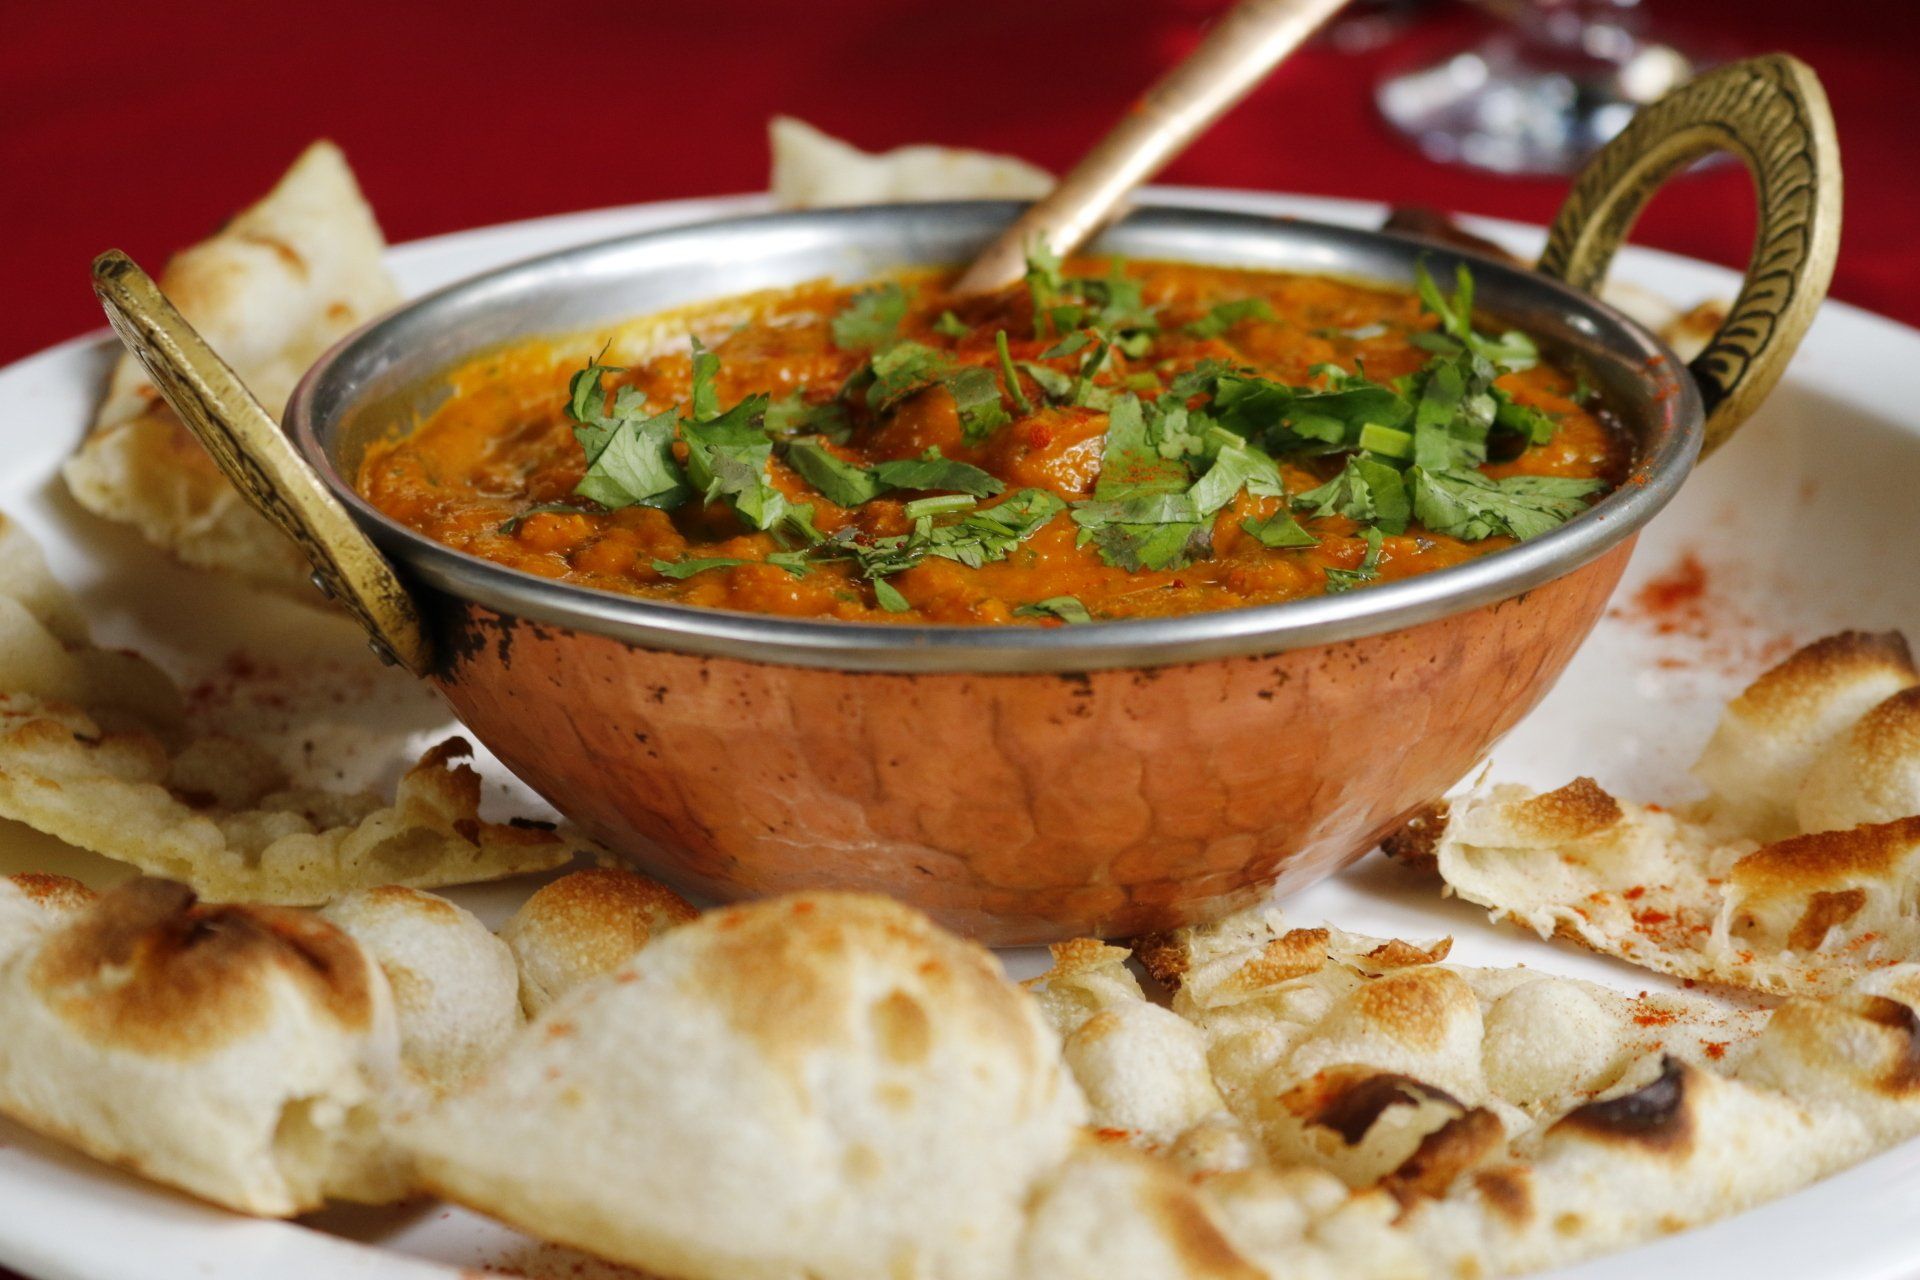 A bowl of curry is on a plate with bread.